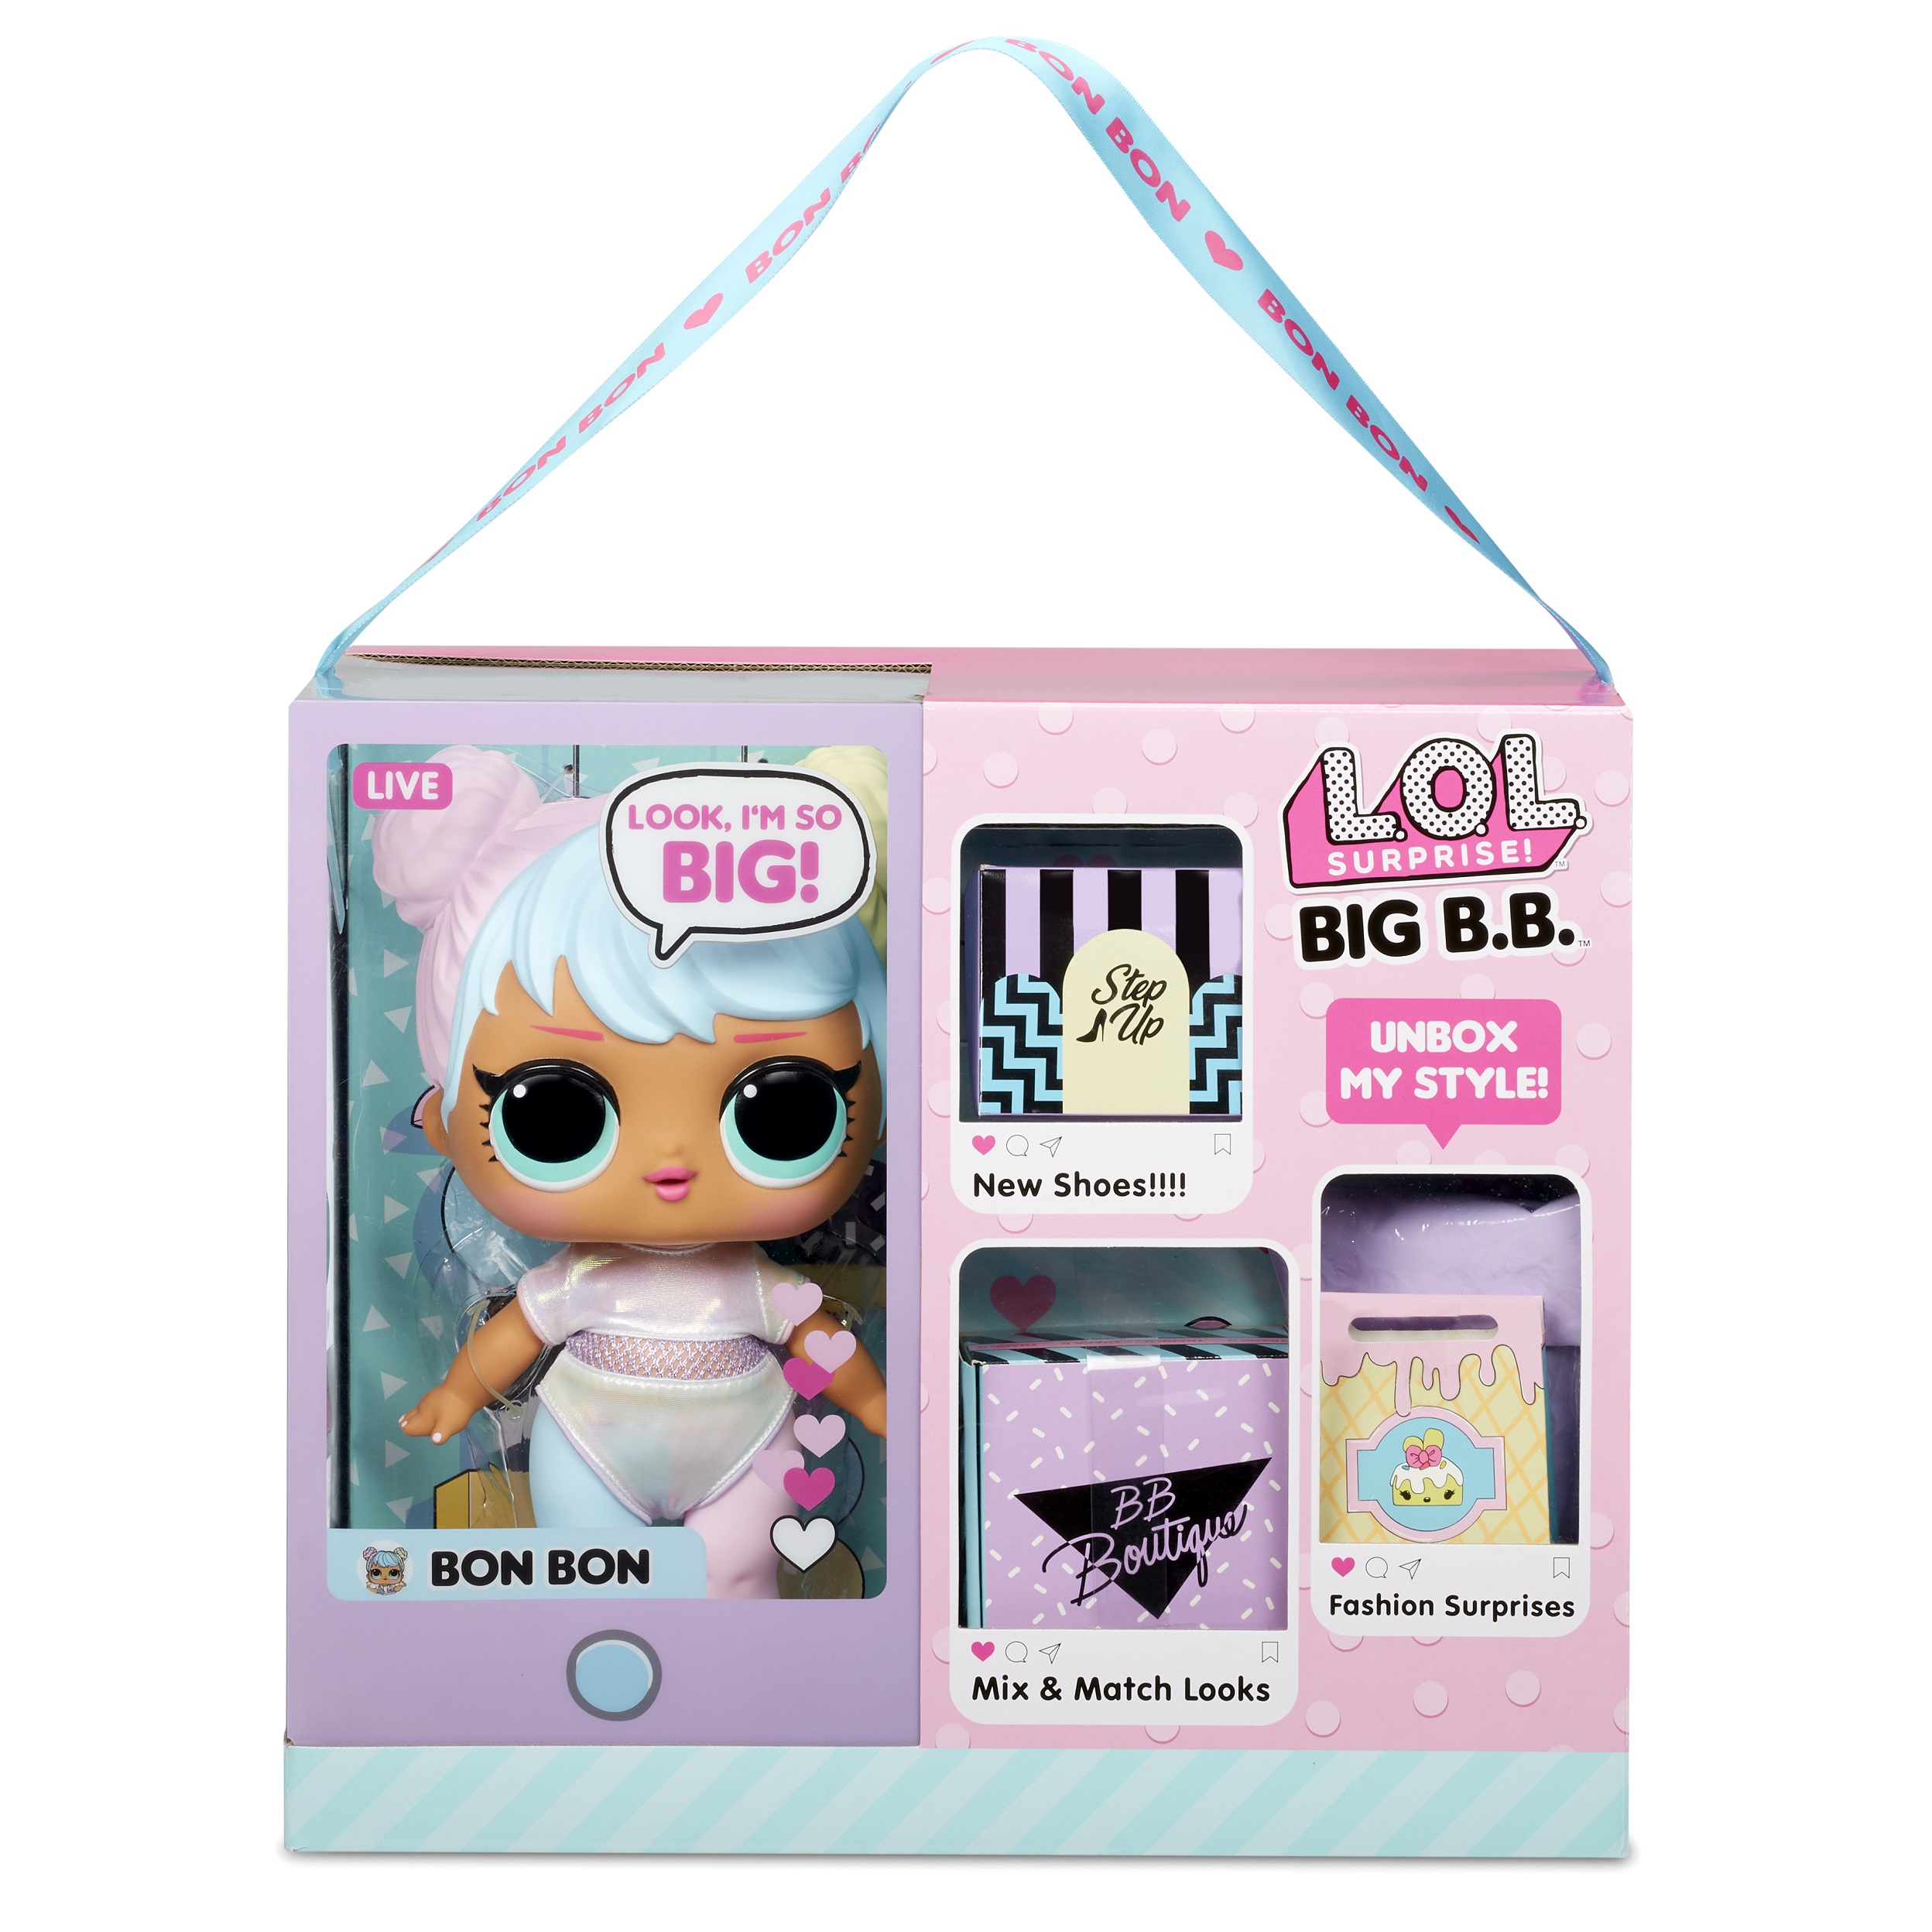 LOL Surprise Big B.B. (Big Baby) Bon Bon – 11" Large Doll, Unbox Fashions, Shoes, Accessories, Includes Playset Desk, Chair and Backdrop - image 3 of 7